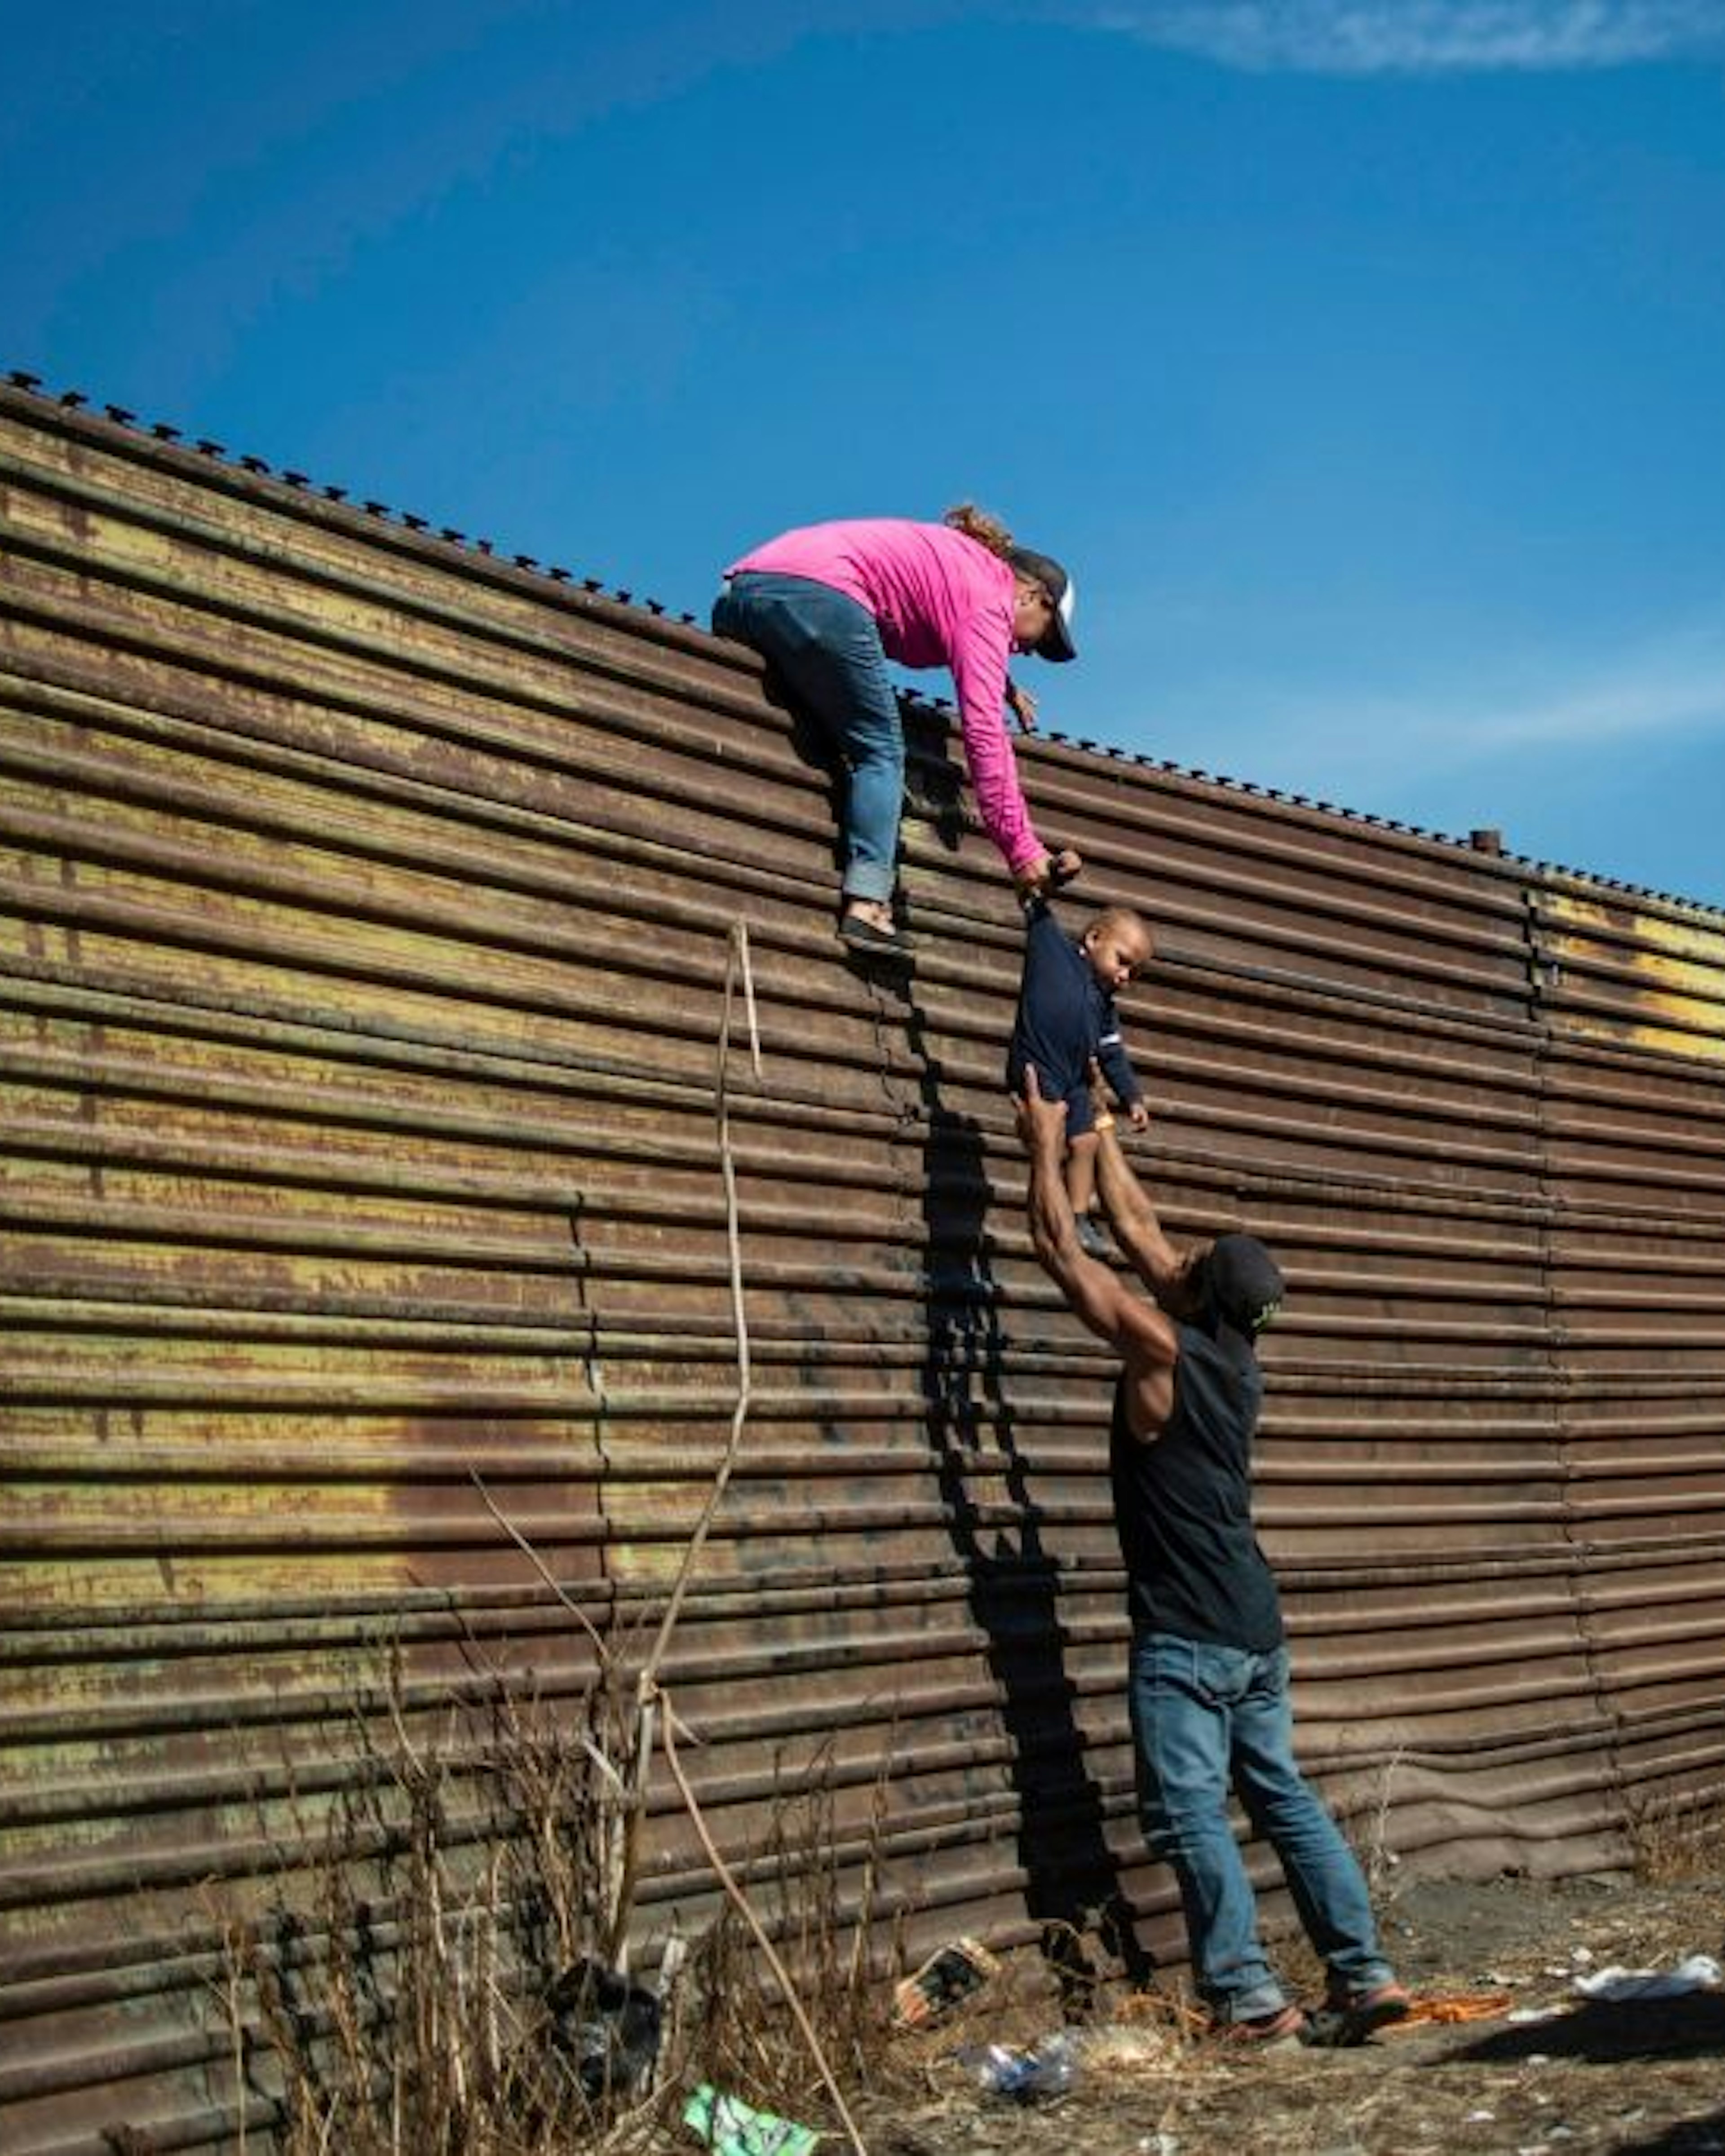 TOPSHOT - A group of Central American migrants climb the border fence between Mexico and the United States, near El Chaparral border crossing, in Tijuana, Baja California State, Mexico, on November 25, 2018. - Hundreds of migrants attempted to storm a border fence separating Mexico from the US on Sunday amid mounting fears they will be kept in Mexico while their applications for a asylum are processed. An AFP photographer said the migrants broke away from a peaceful march at a border bridge and tried to climb over a metal border barrier in the attempt to enter the United States. (Photo by Pedro PARDO / AFP) (Photo by PEDRO PARDO/AFP via Getty Images)